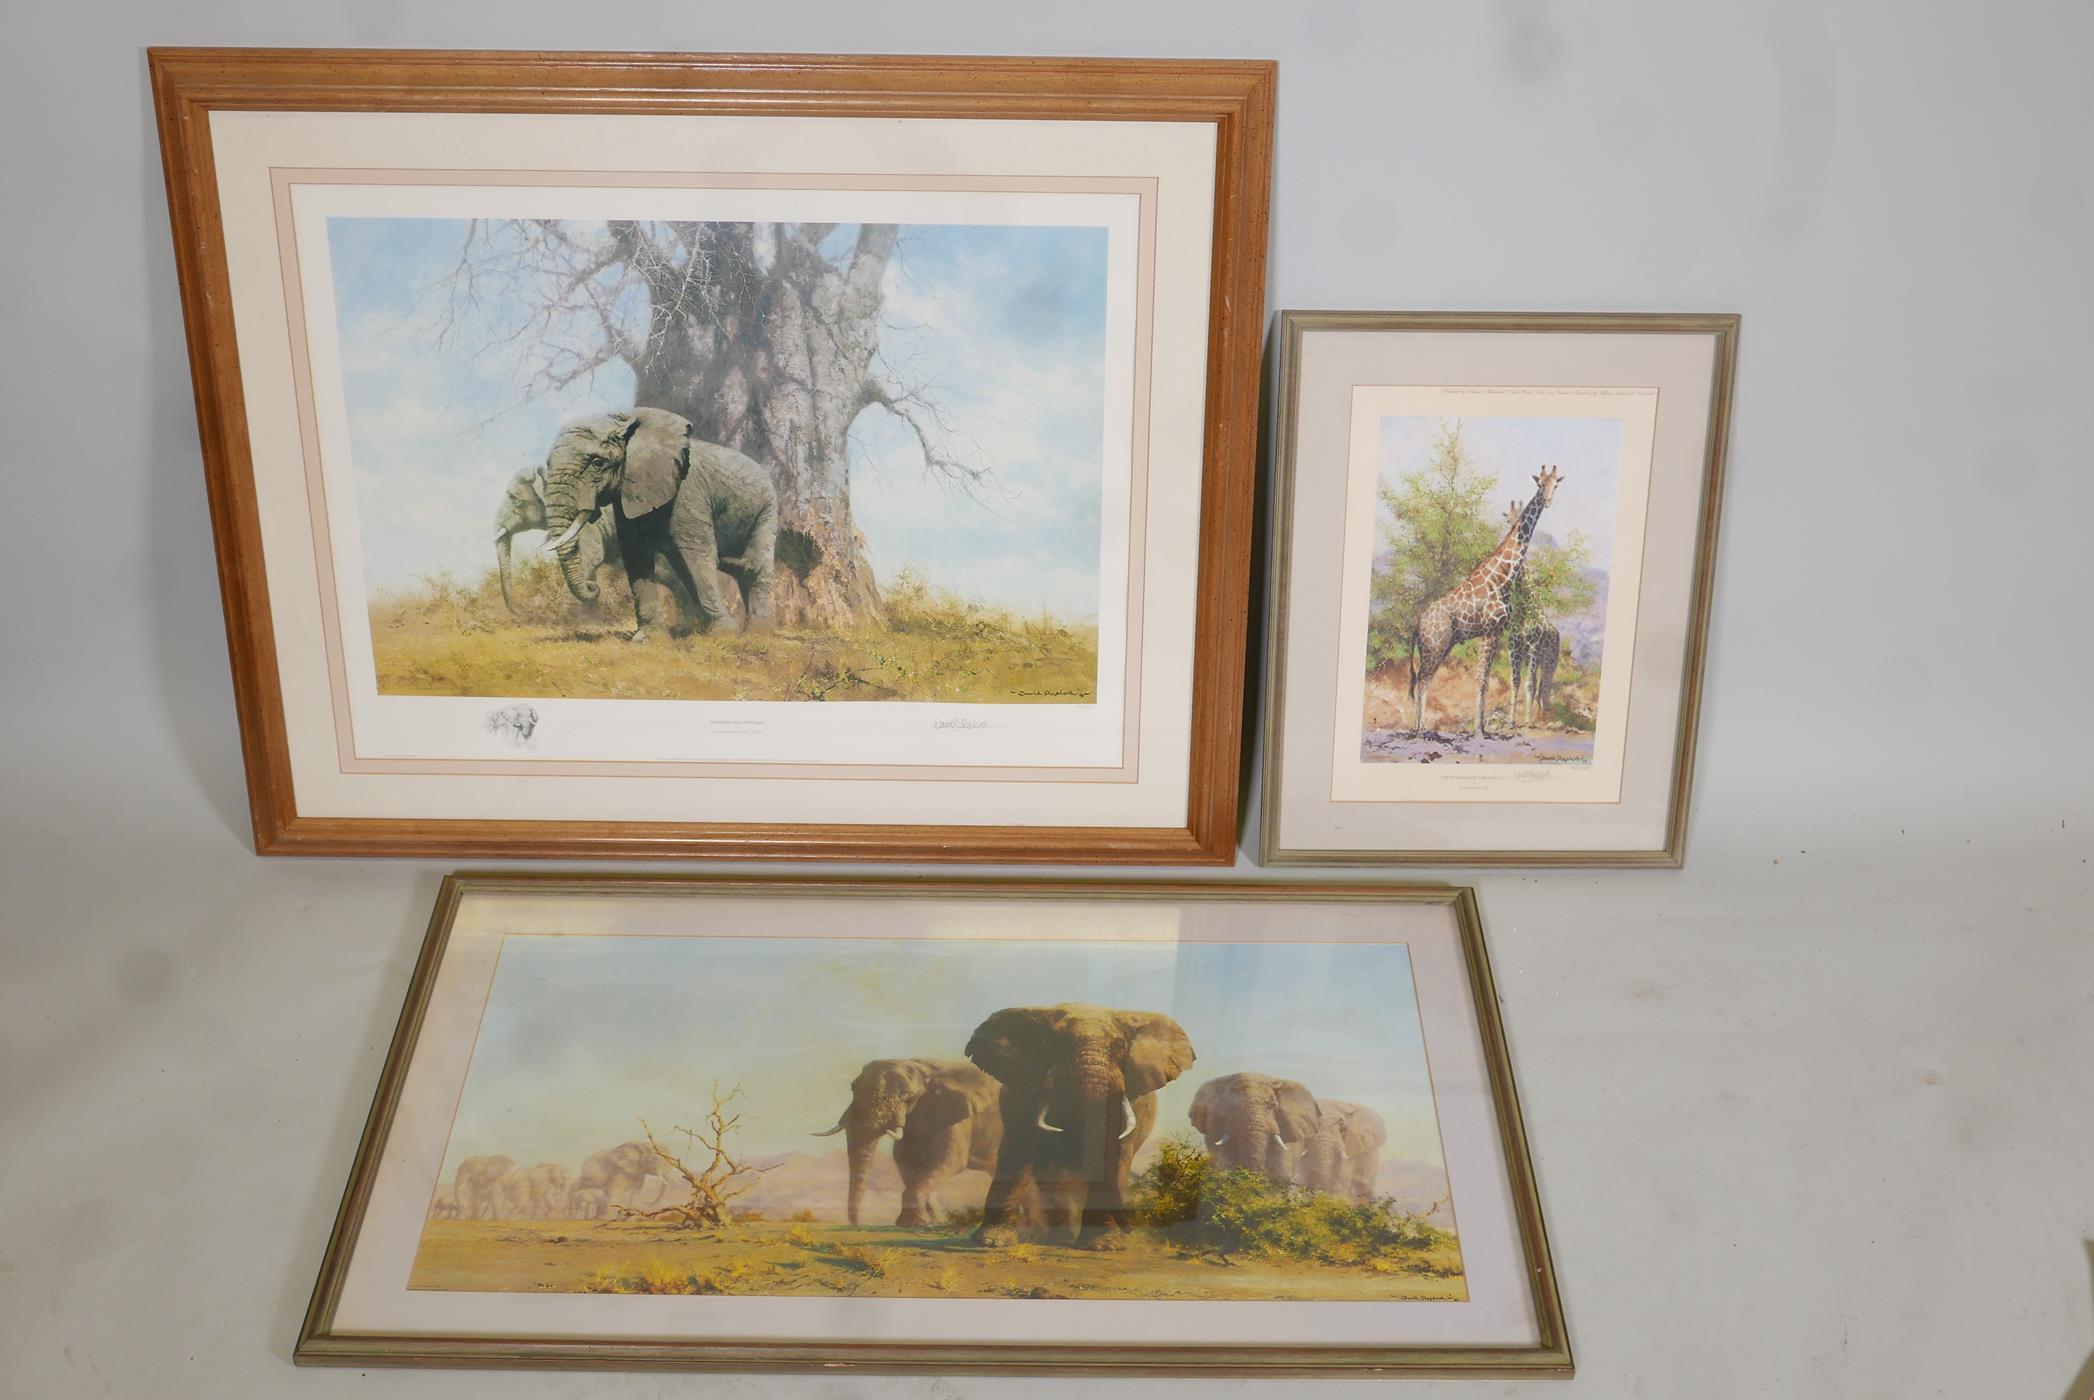 David Shepherd, two limited edition prints of African animals. 'Baobab & Friends', (112/950). And '